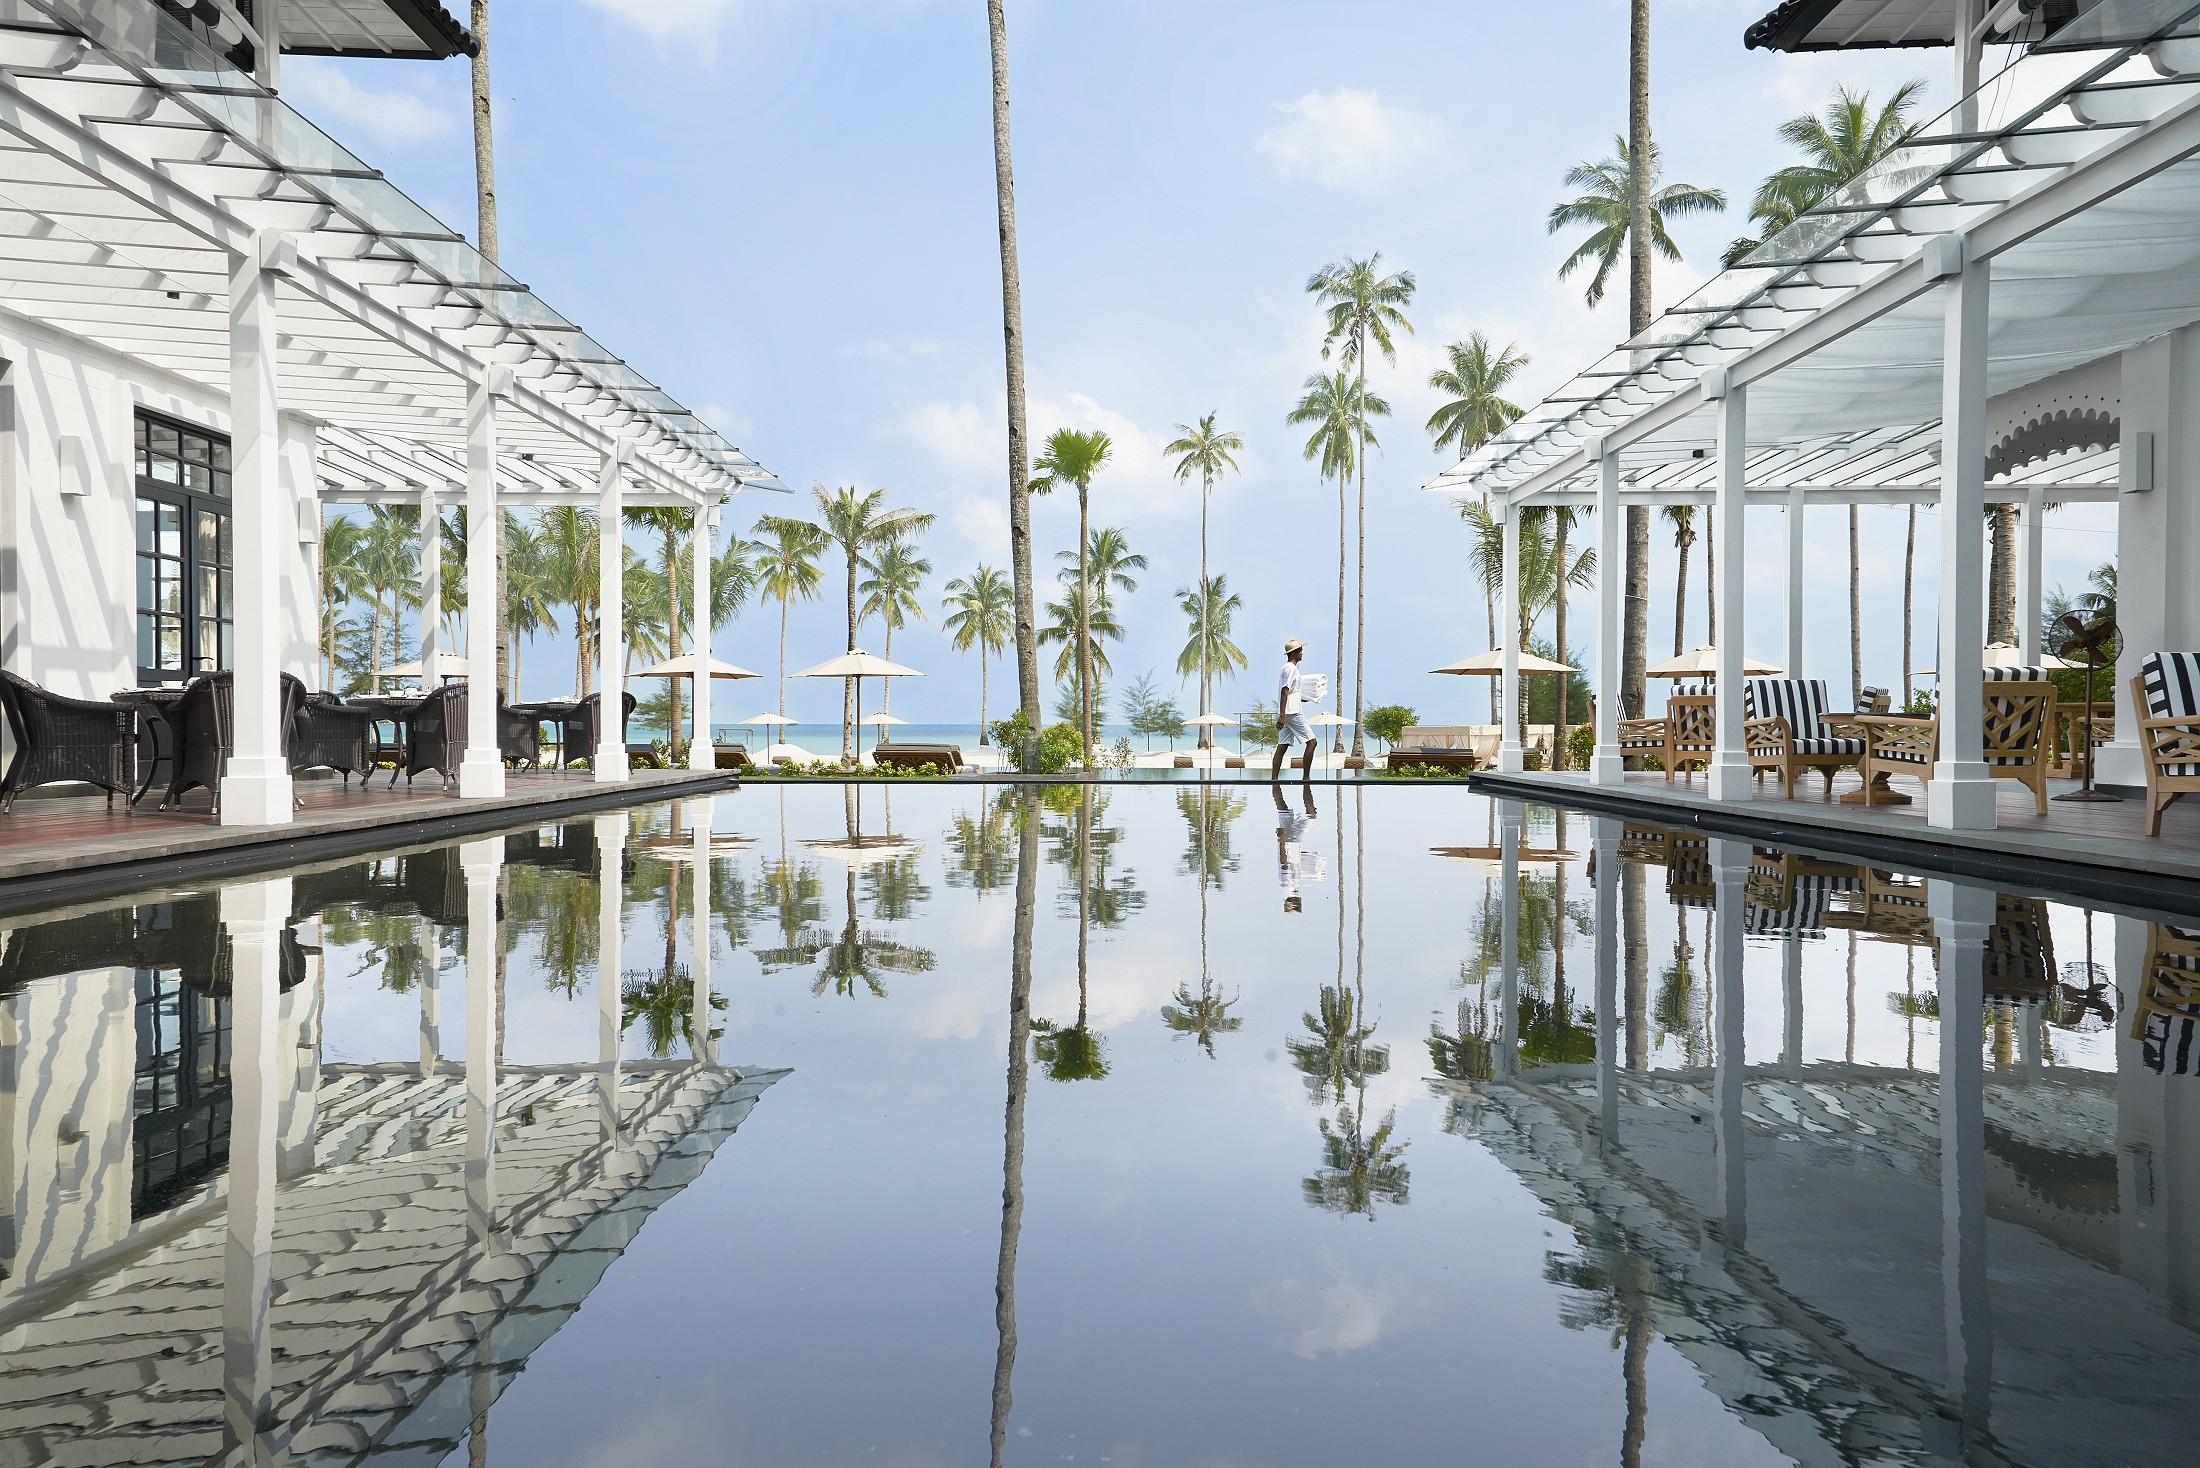 The Sanchaya beachfront hotel in Nintan, Indonesia is a favourite meetings venue for senior executives based in neighbouring Singapore.